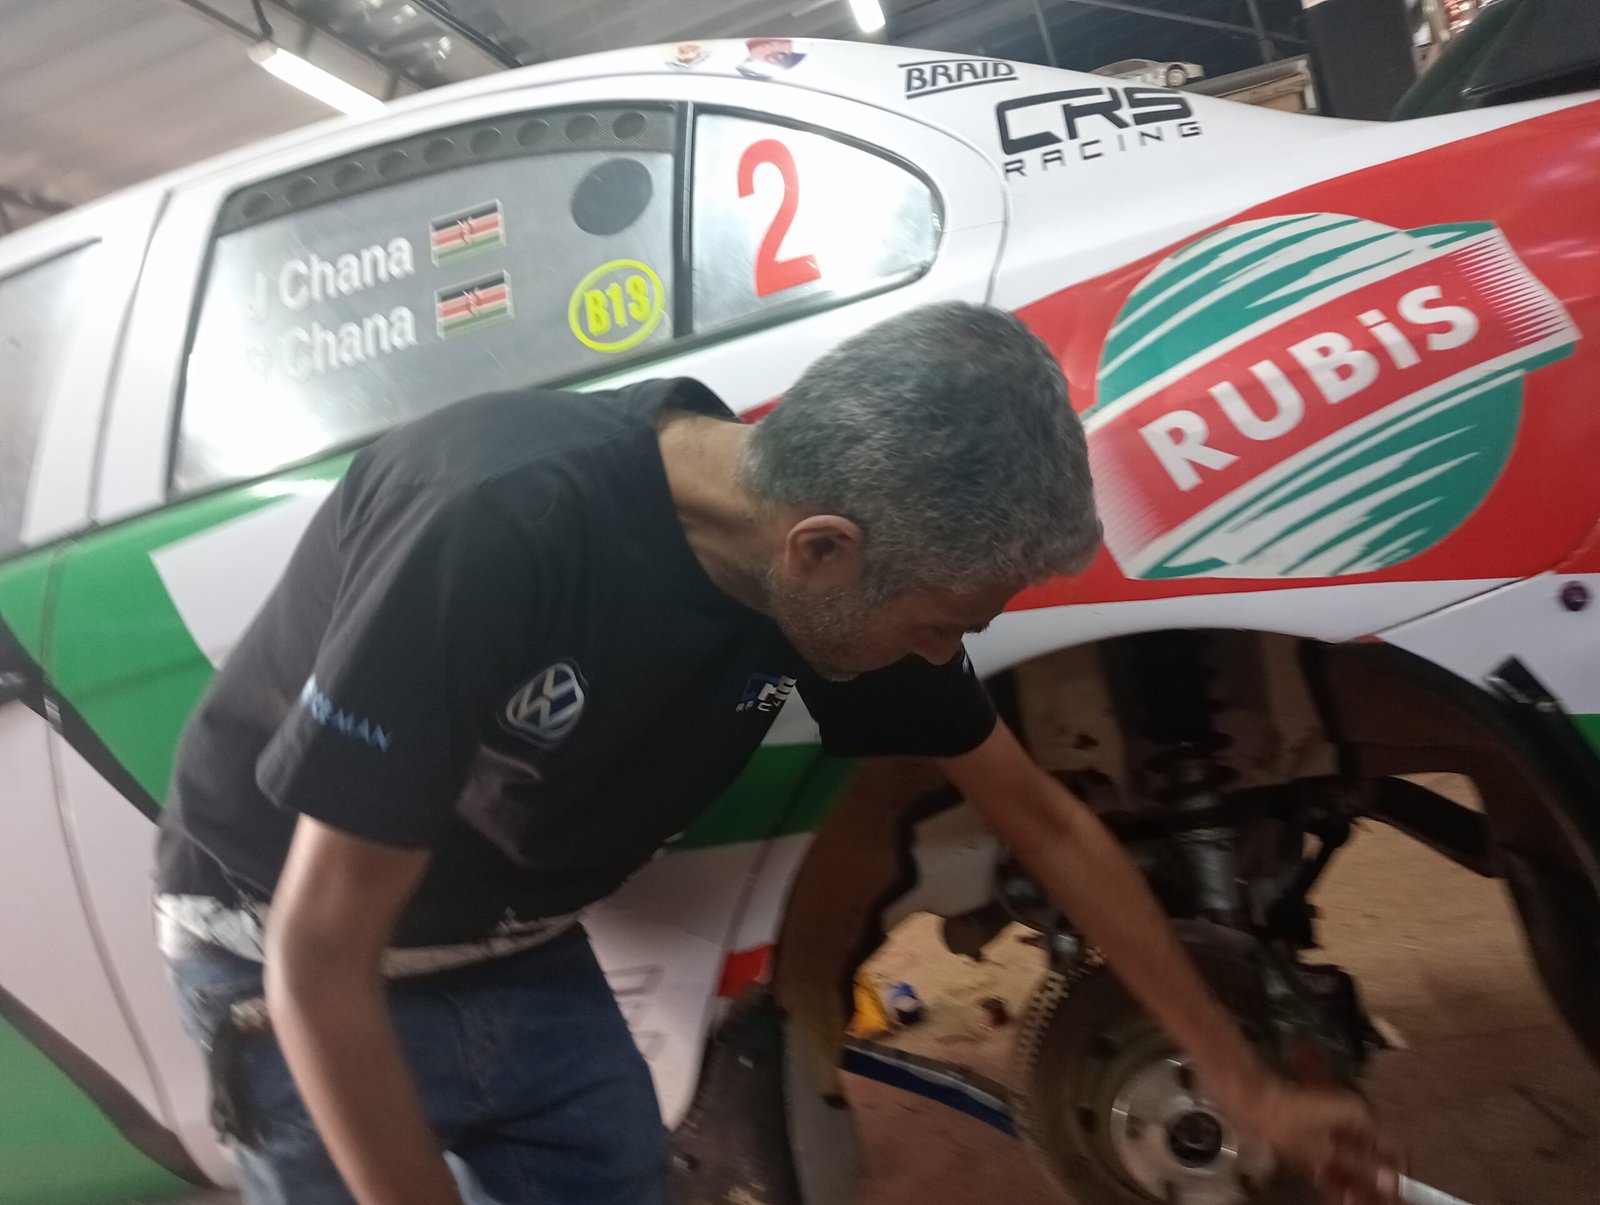 Jasmeet Chana working to prepare his vehicle for Bissil